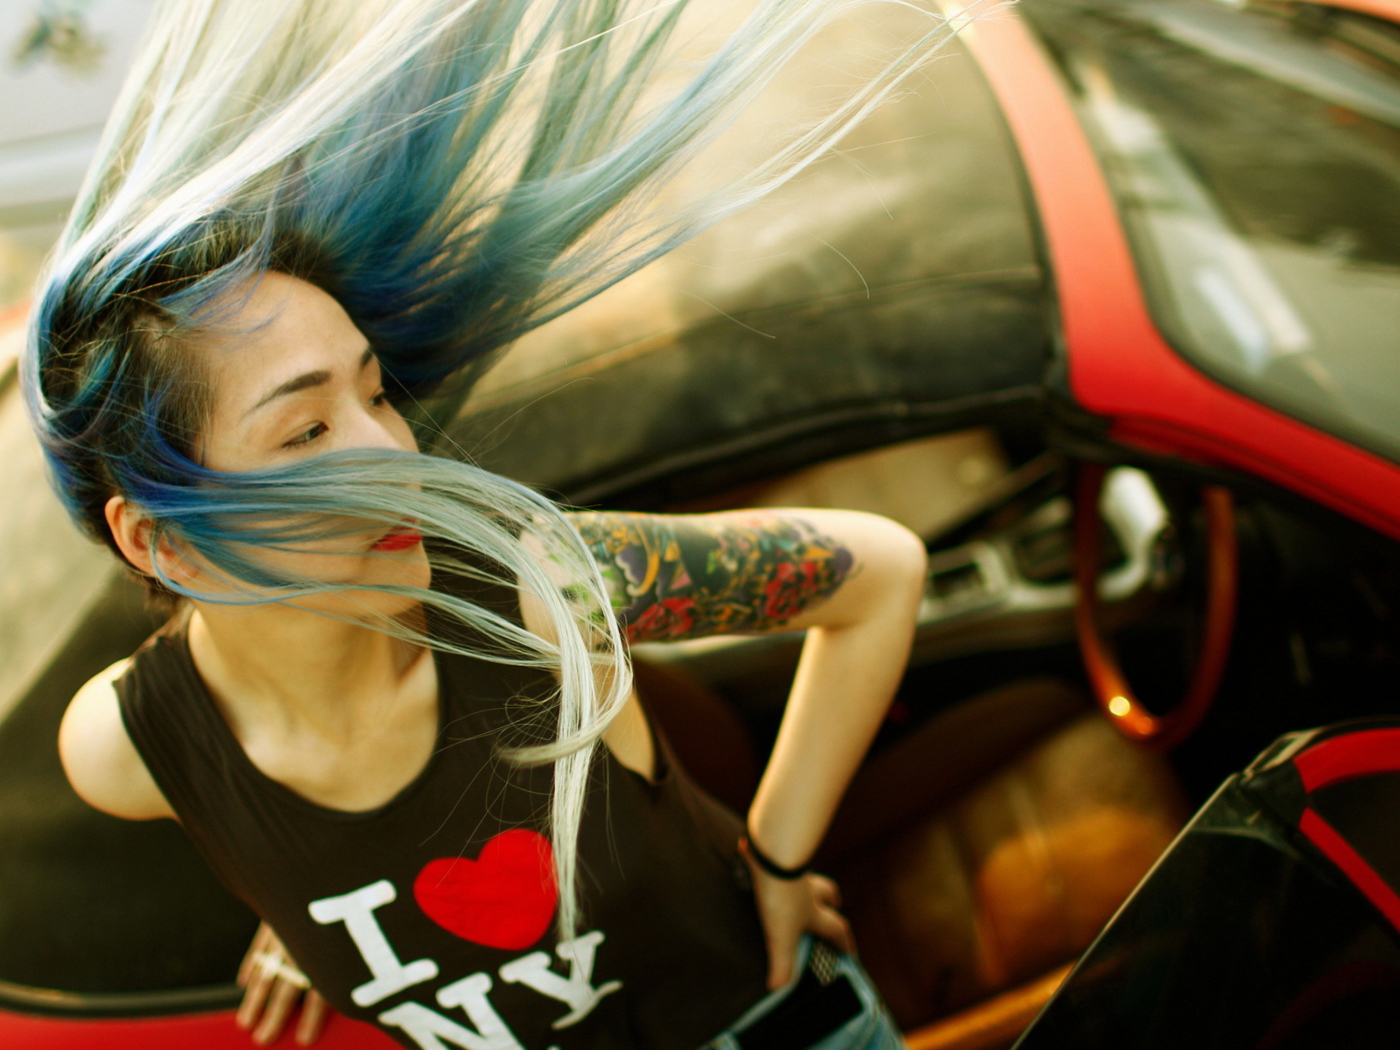 Das Cool Asian Girl With Blue Hair & I Love NY T-shirt Wallpaper 1400x1050